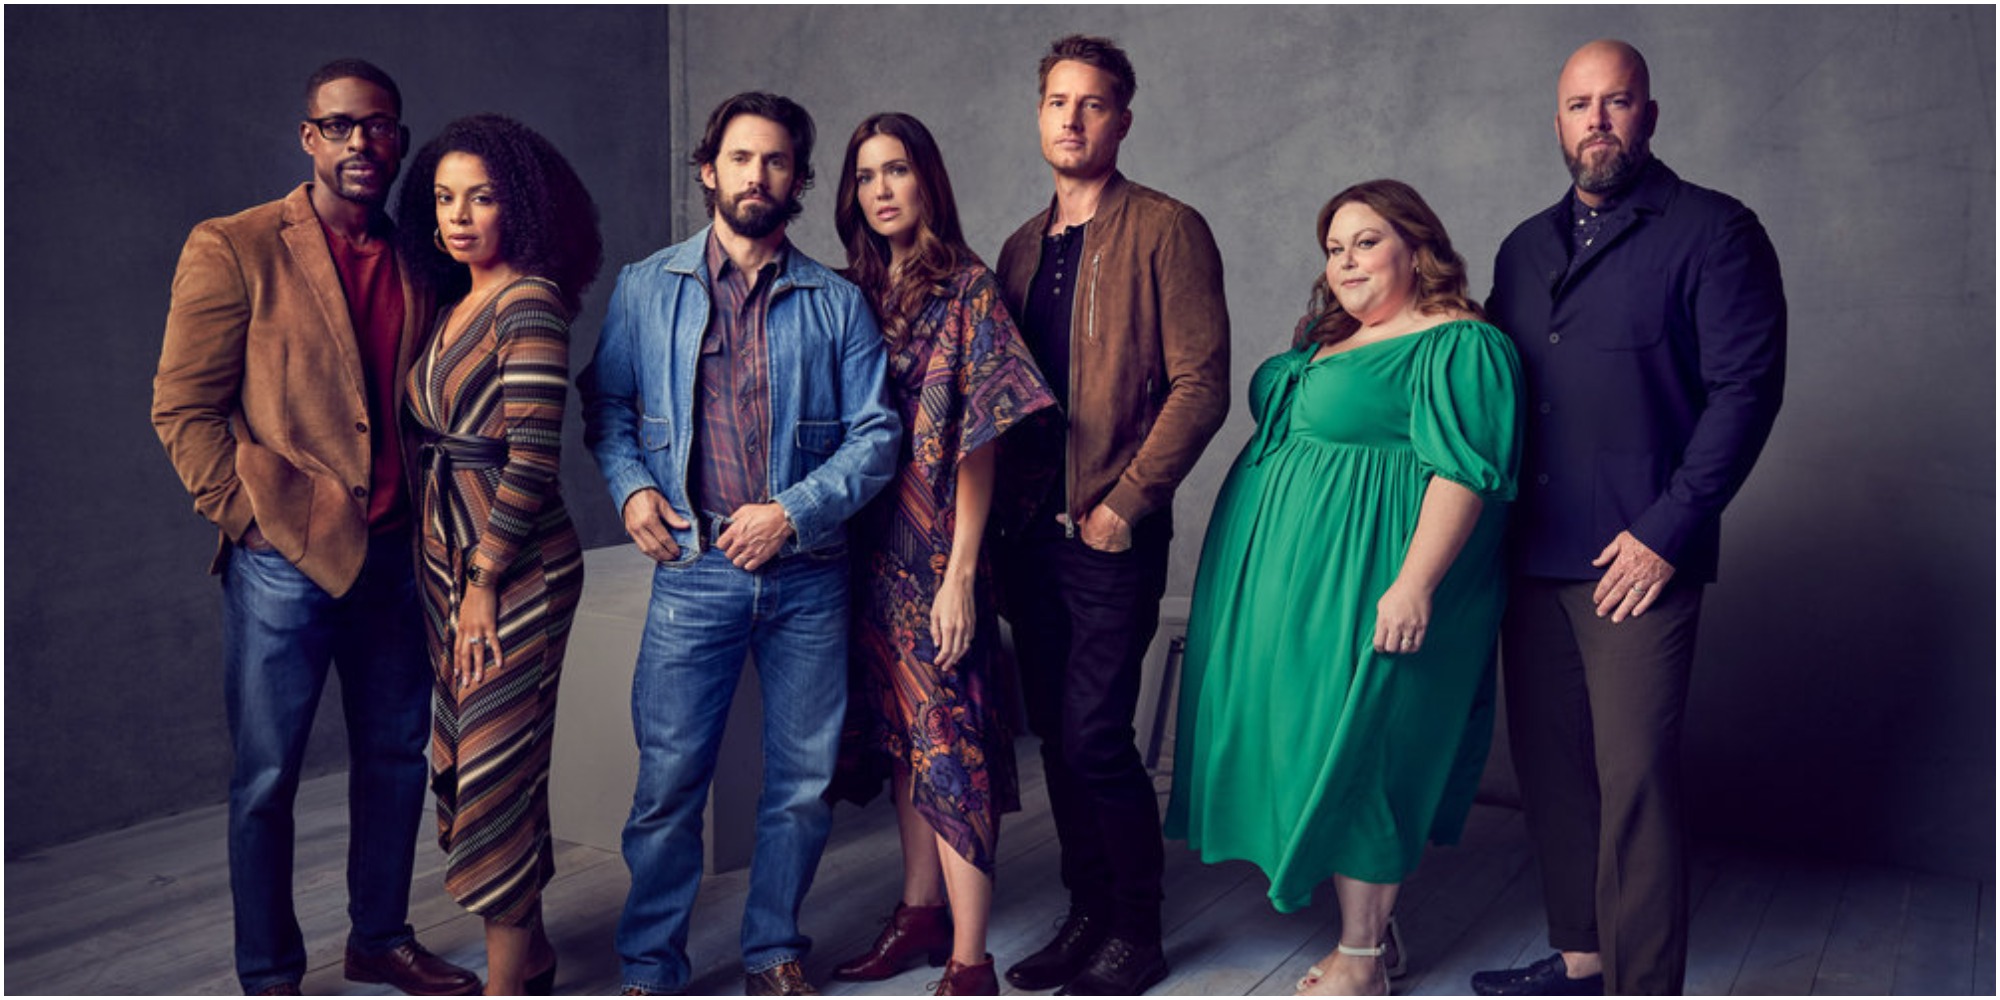 The cast of 'This Is Us' Sterling K Brown, Susan Kelechi Watson, Milo Ventimiglia, Mandy Moore, Justin Hartley, Chrissy Metz, and Chris Sullivan